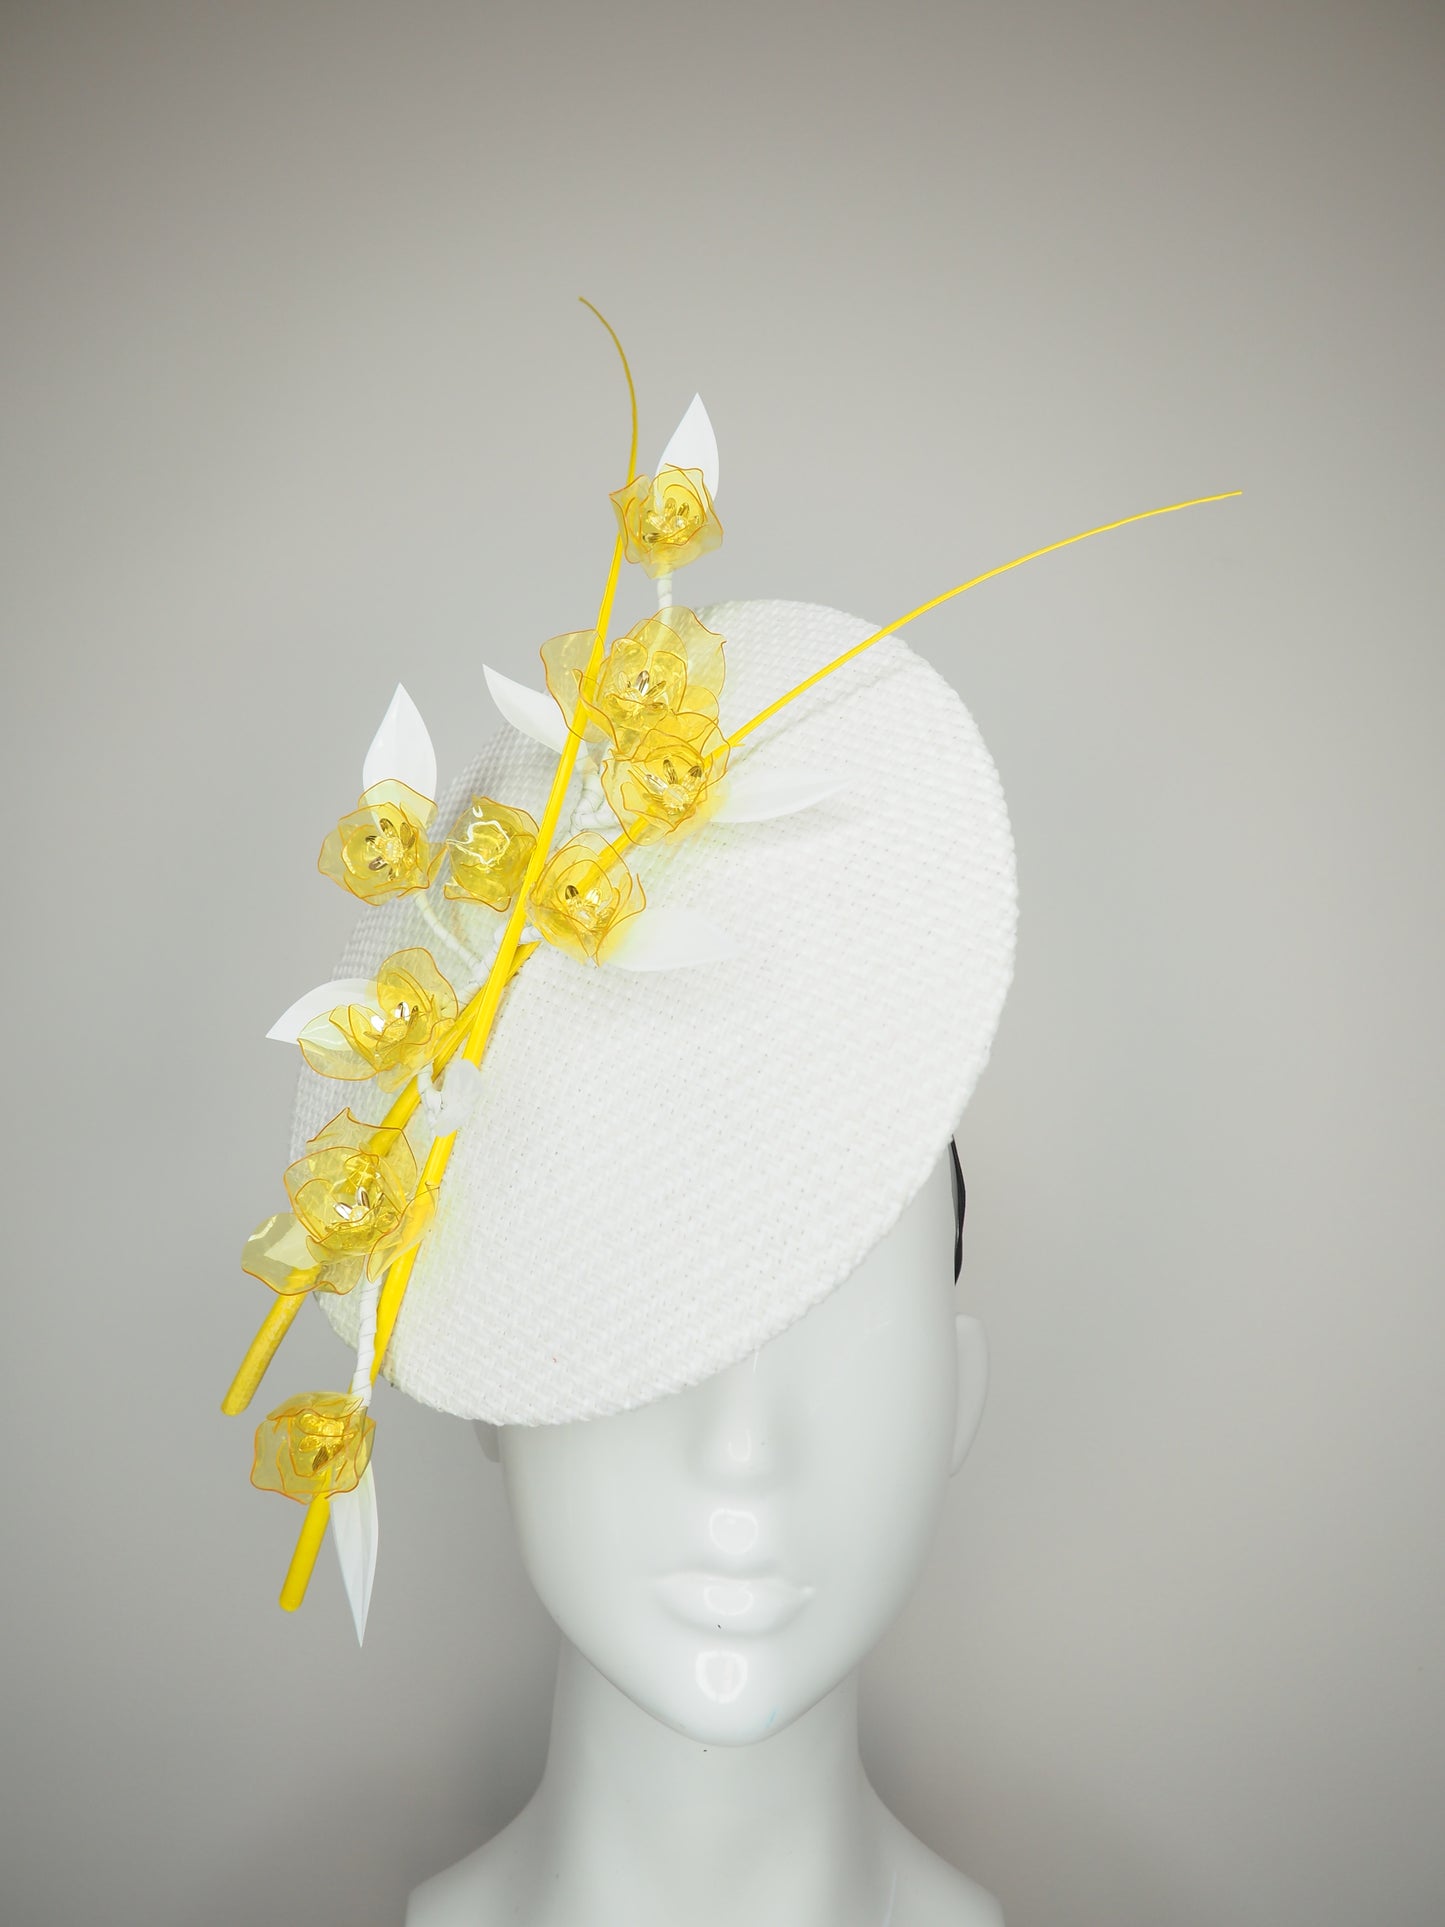 Snow buttercup - White raffia disc with golden yellow crystoform buttercups